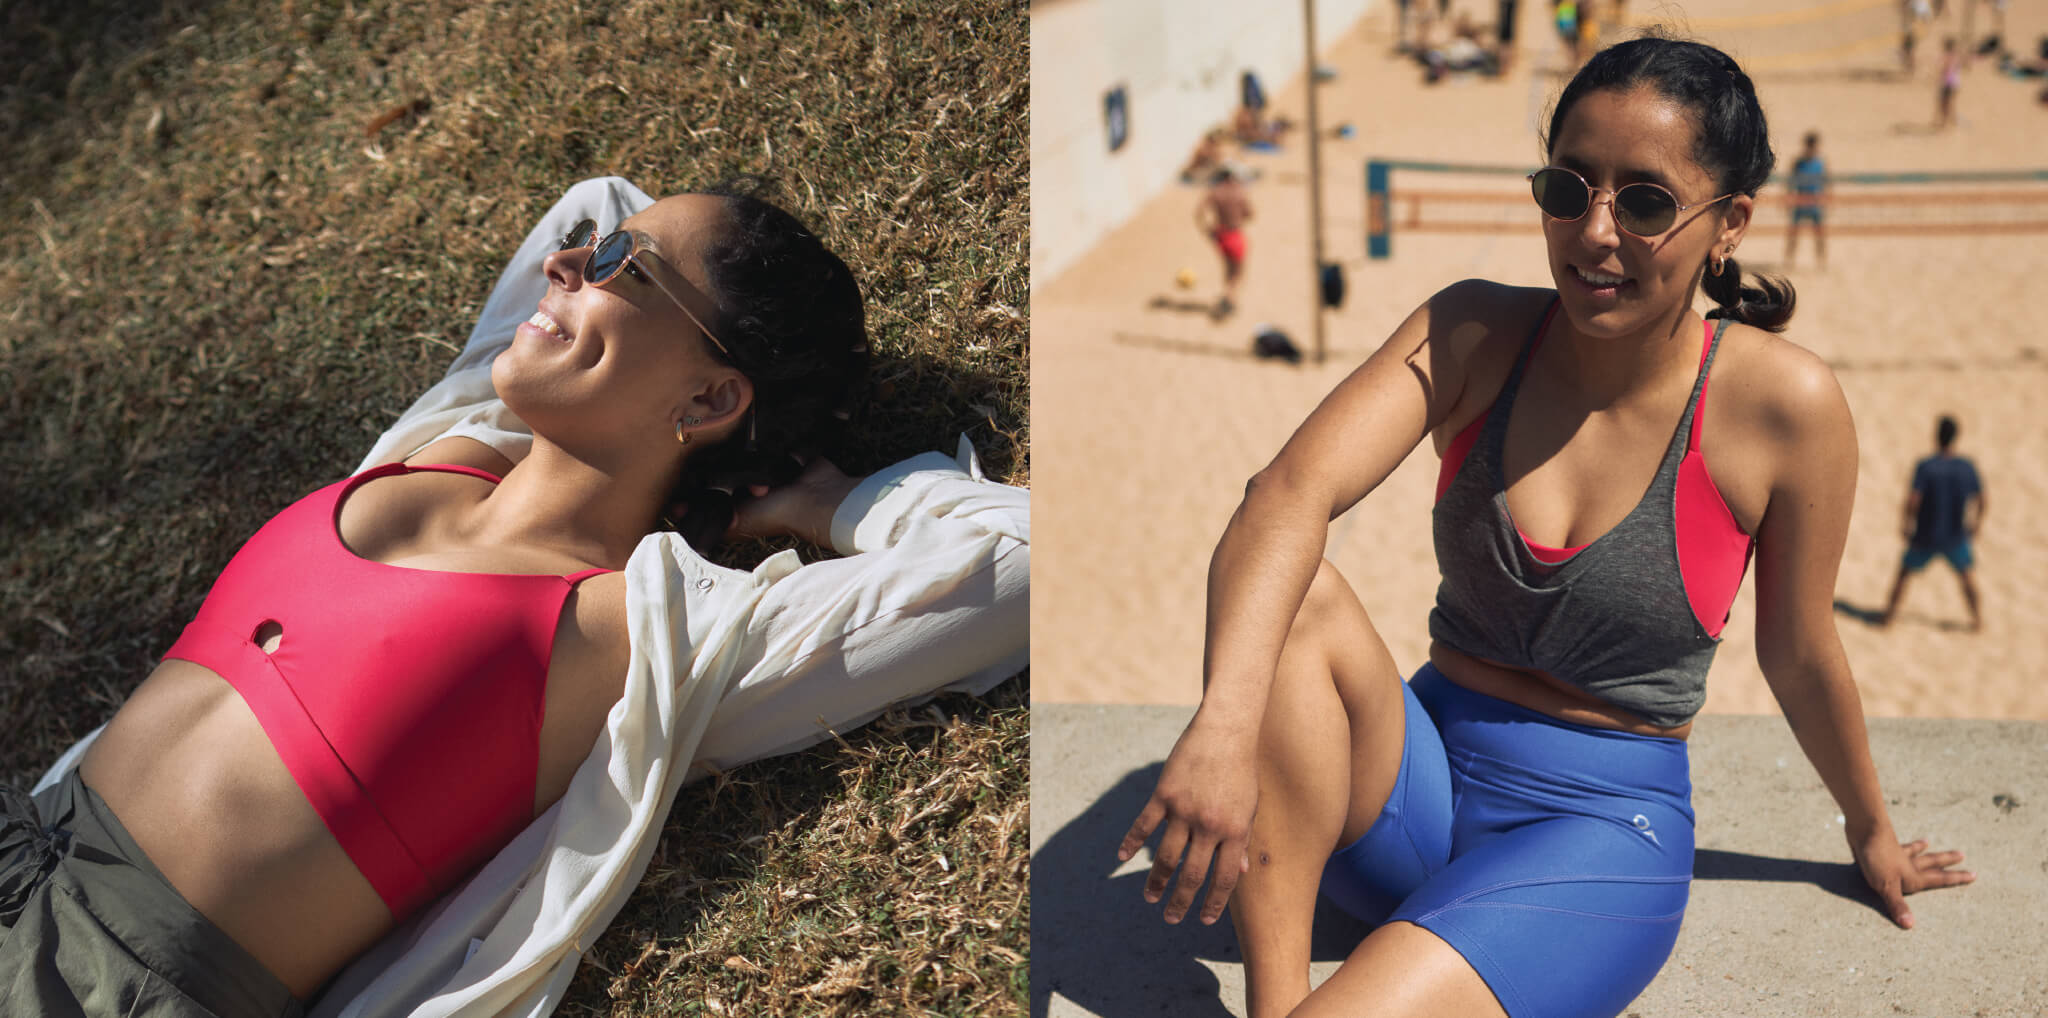 image of a woman laying in the grass wearing a bright coral sports bra and army green bottoms with a cream silk top. Second image is a woman wearing a coral sporty bra top with a grey tank top and purple biker shorts. People are playing beach volleyball in the background.